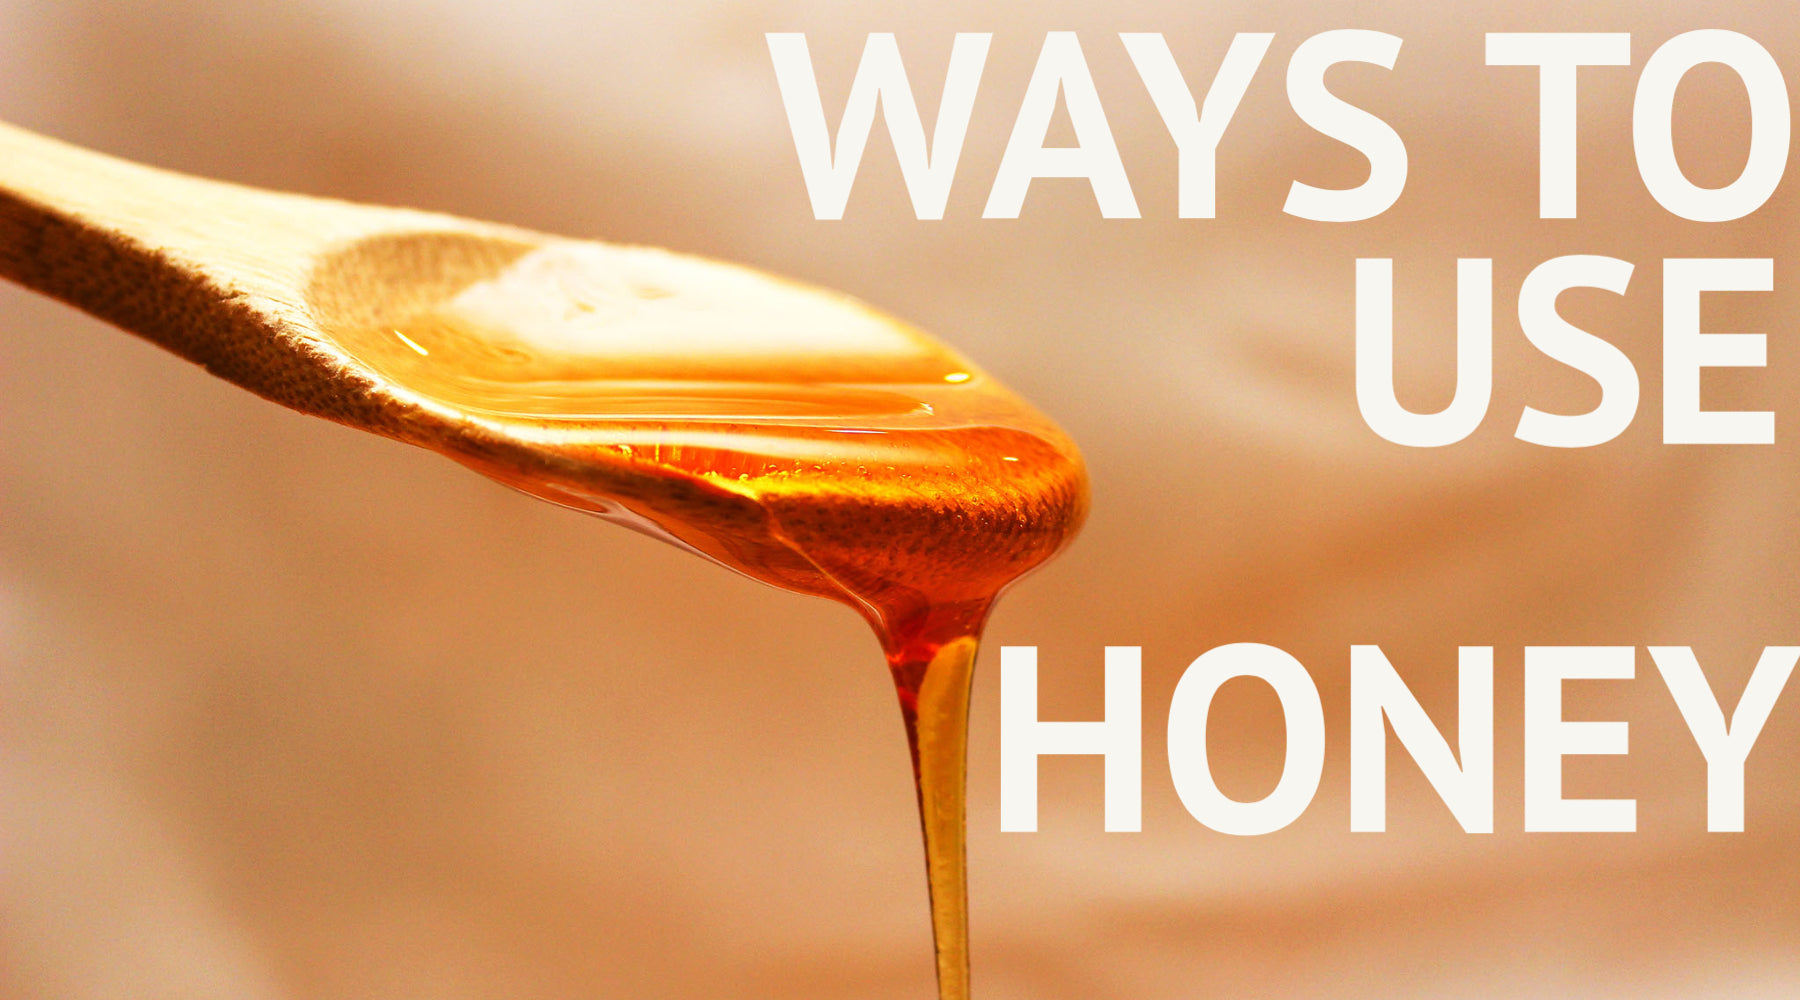 Honey dripping off wooden spoon with text 'ways to use honey'